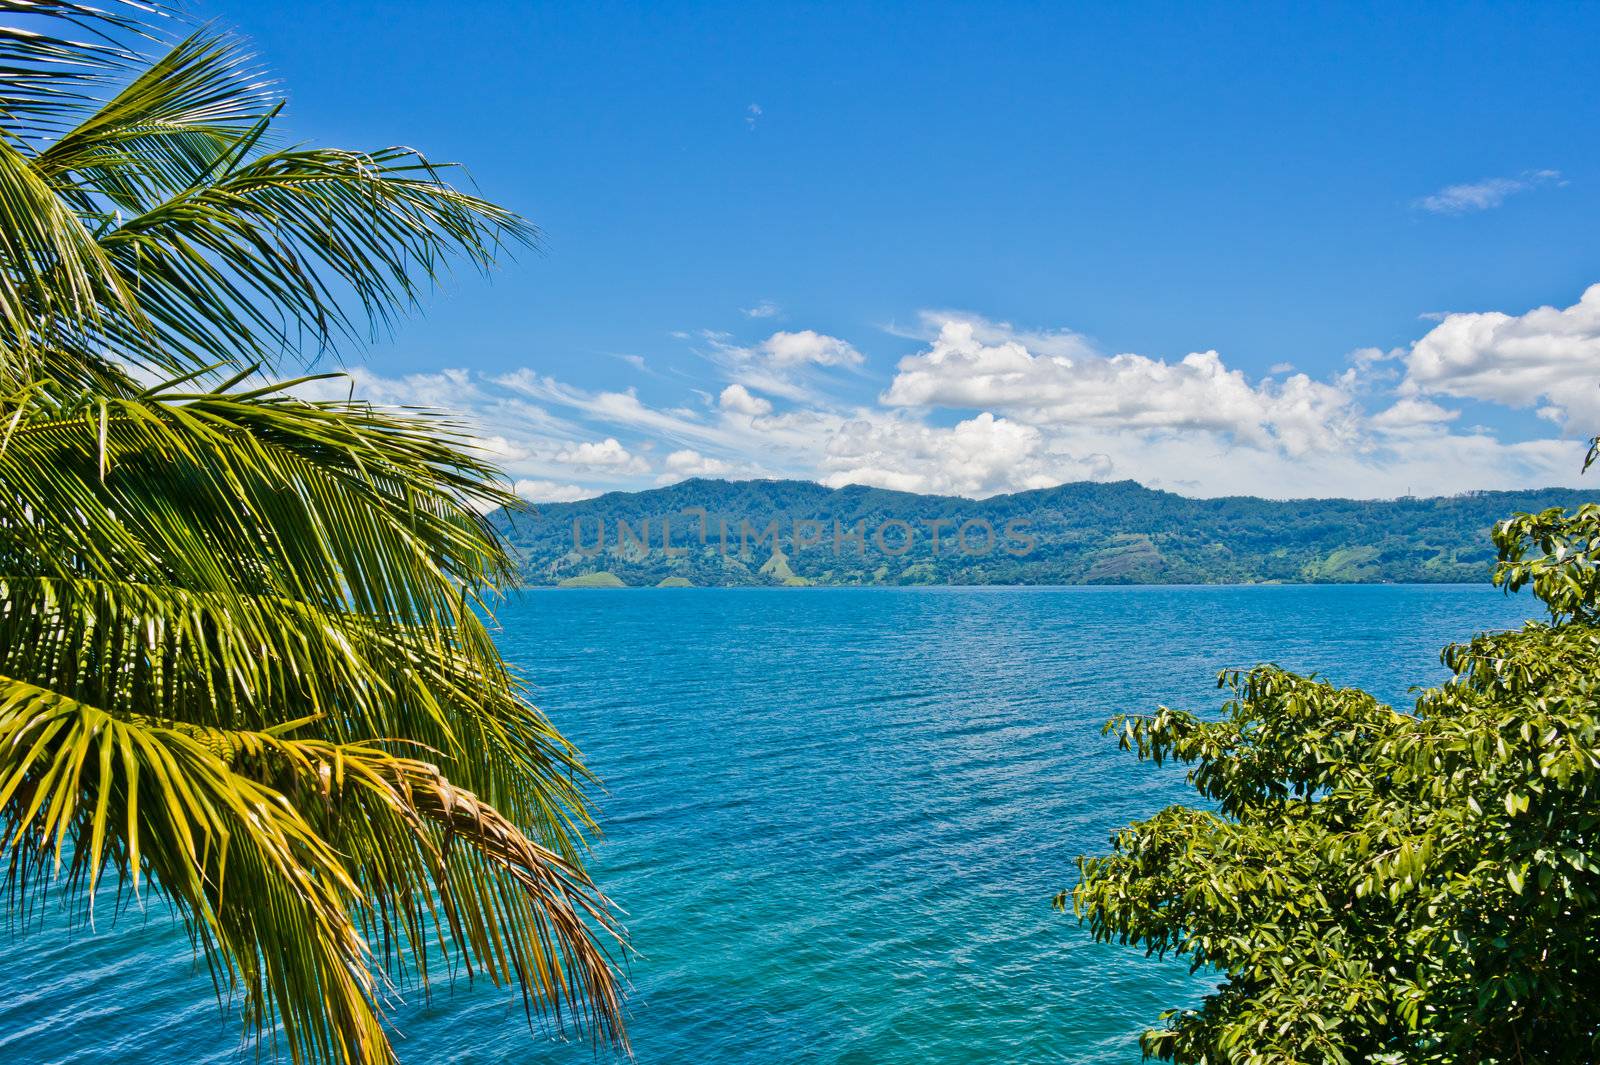 View of Lake Toba in Sumatra, Indonesia.
It is the largest and deepest volcanic crater lake in the world.